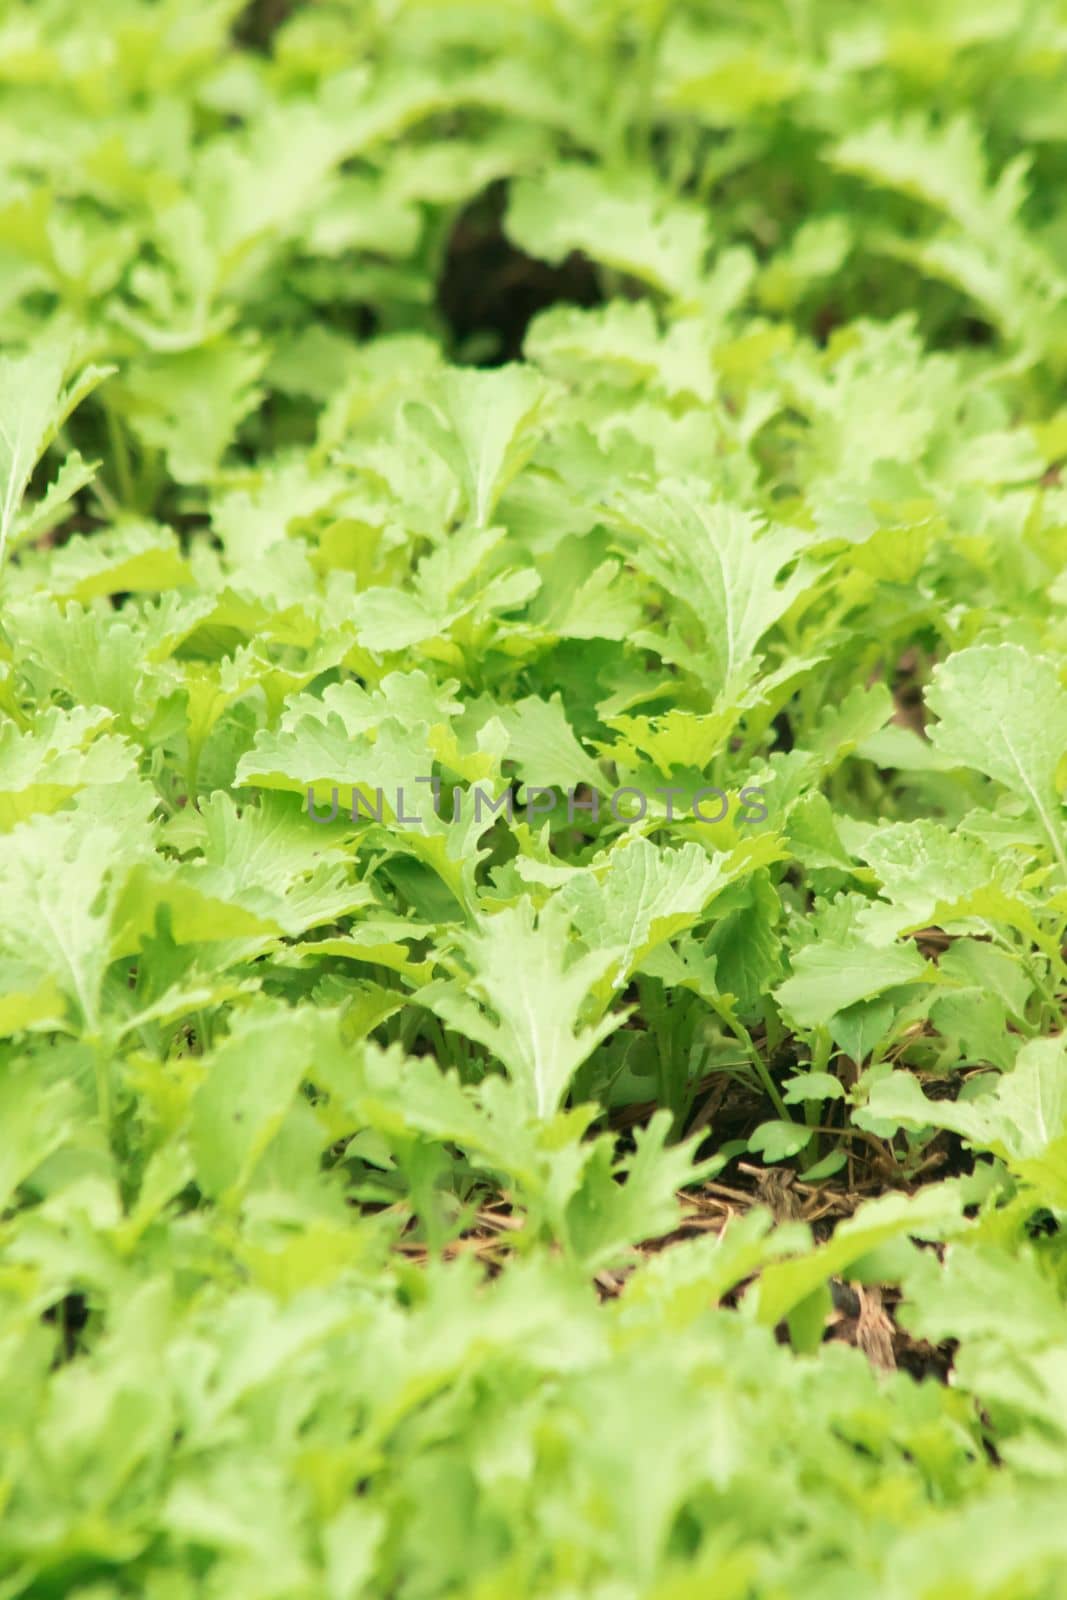 Mustard Green on the soil plot that has a curly, wrinkled leaf surface by Puripatt